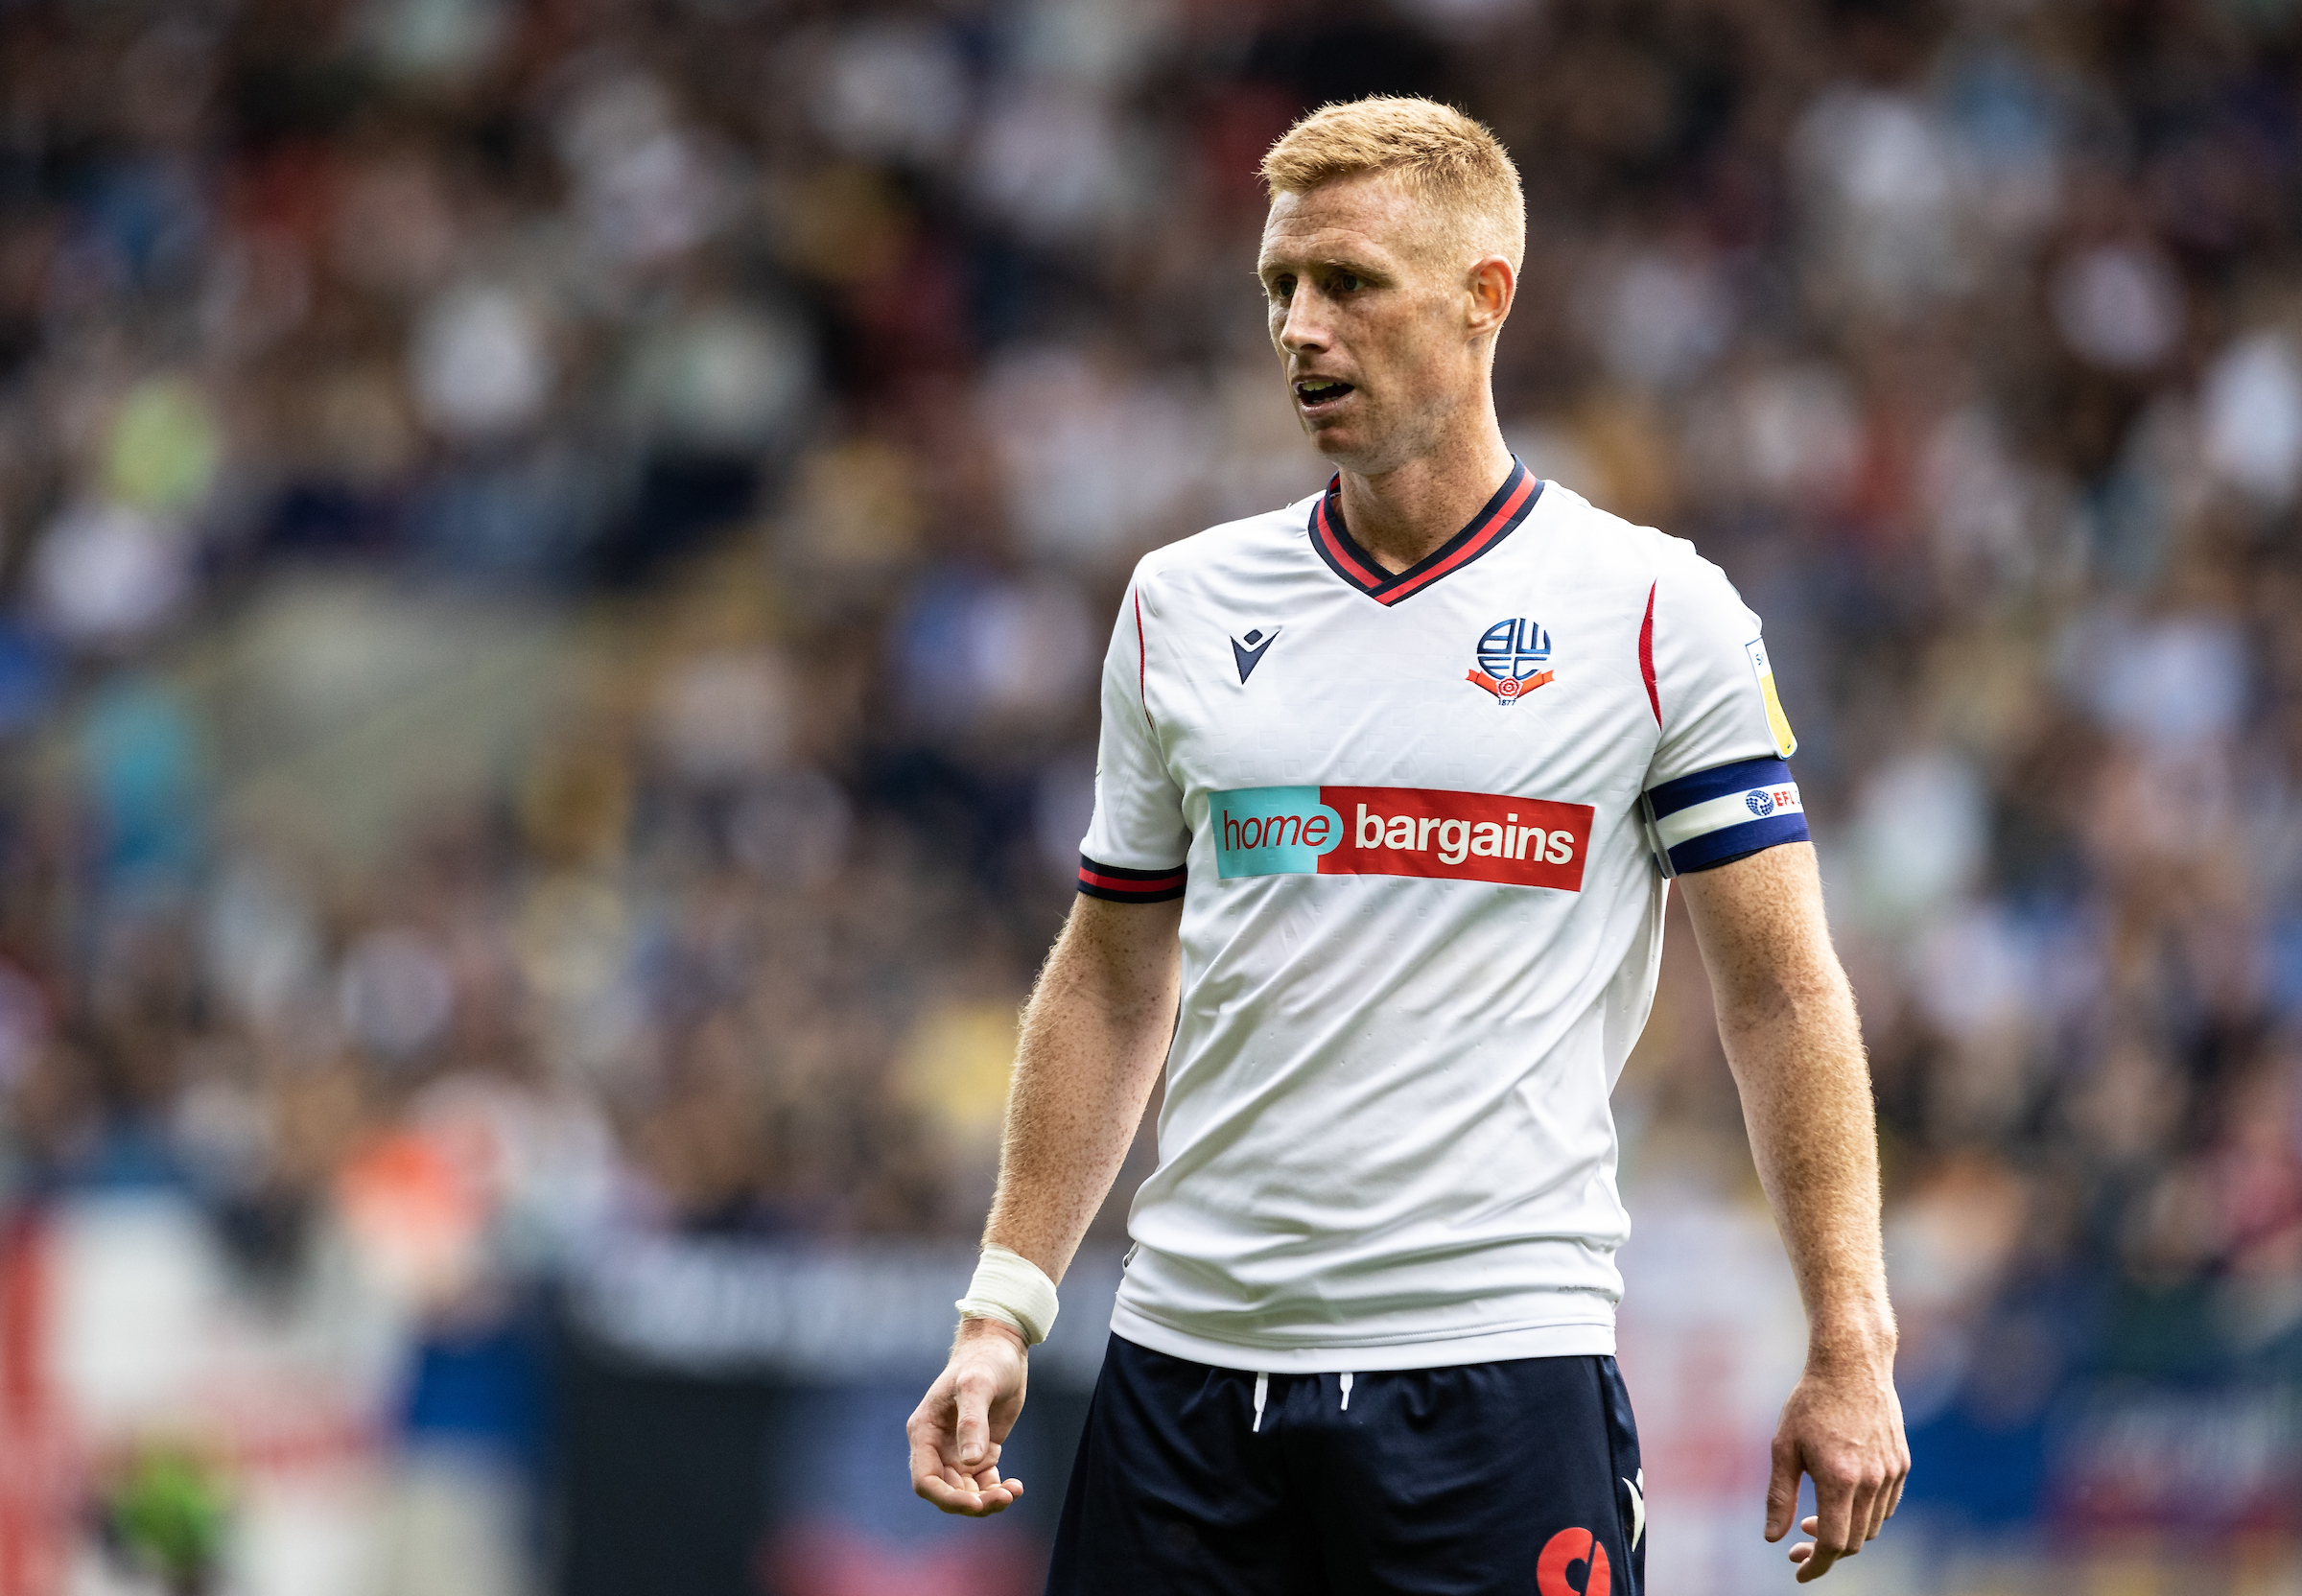 Bolton Wanderers' Eoin Doyle hoping for 'feast time' after goal drought